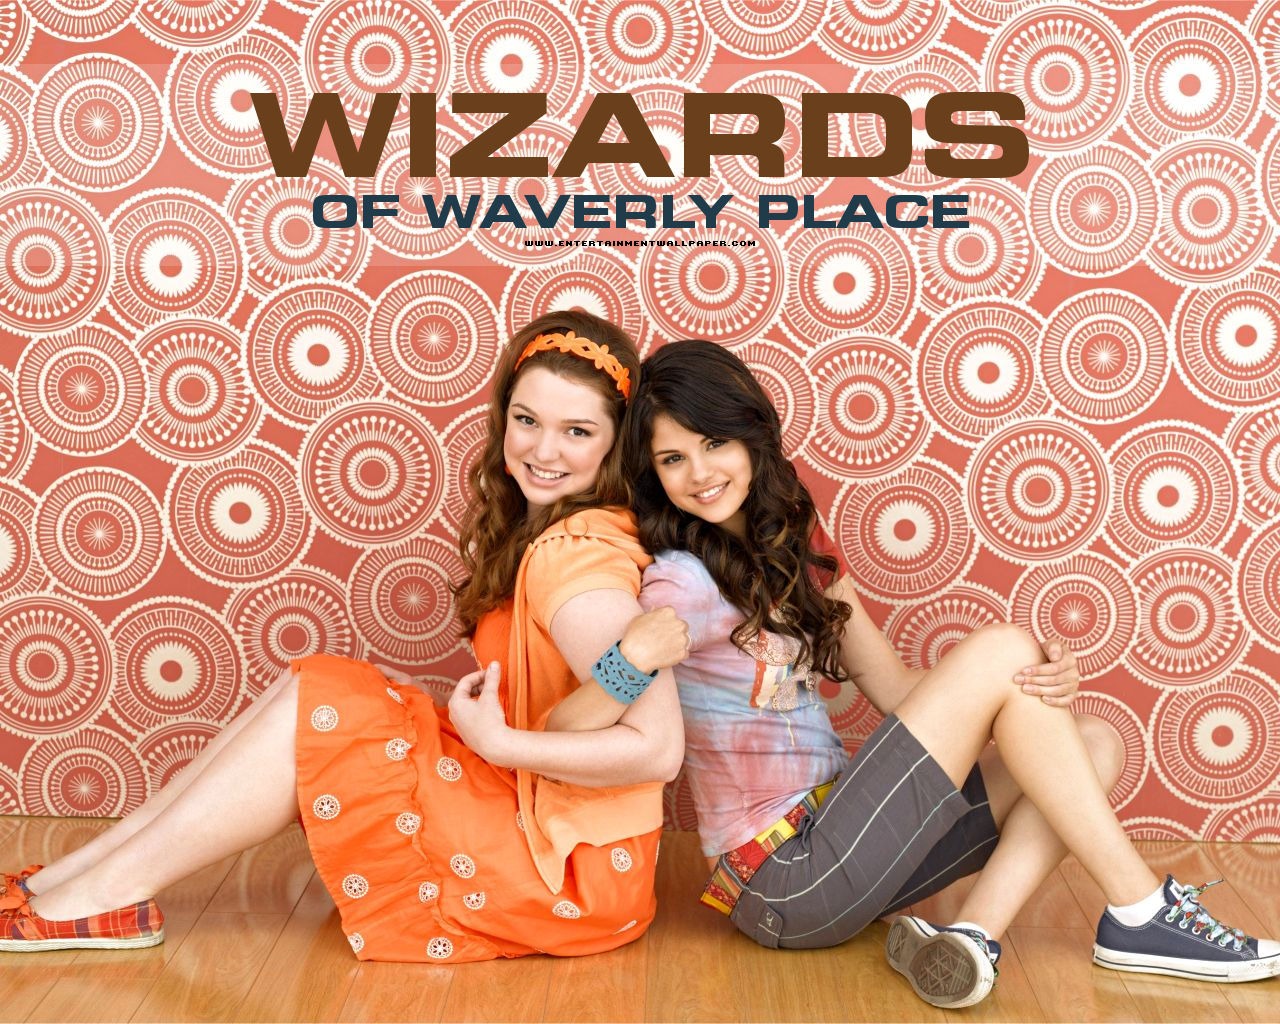 Wizards of Waverly Place wallpaper #9 - 1280x1024